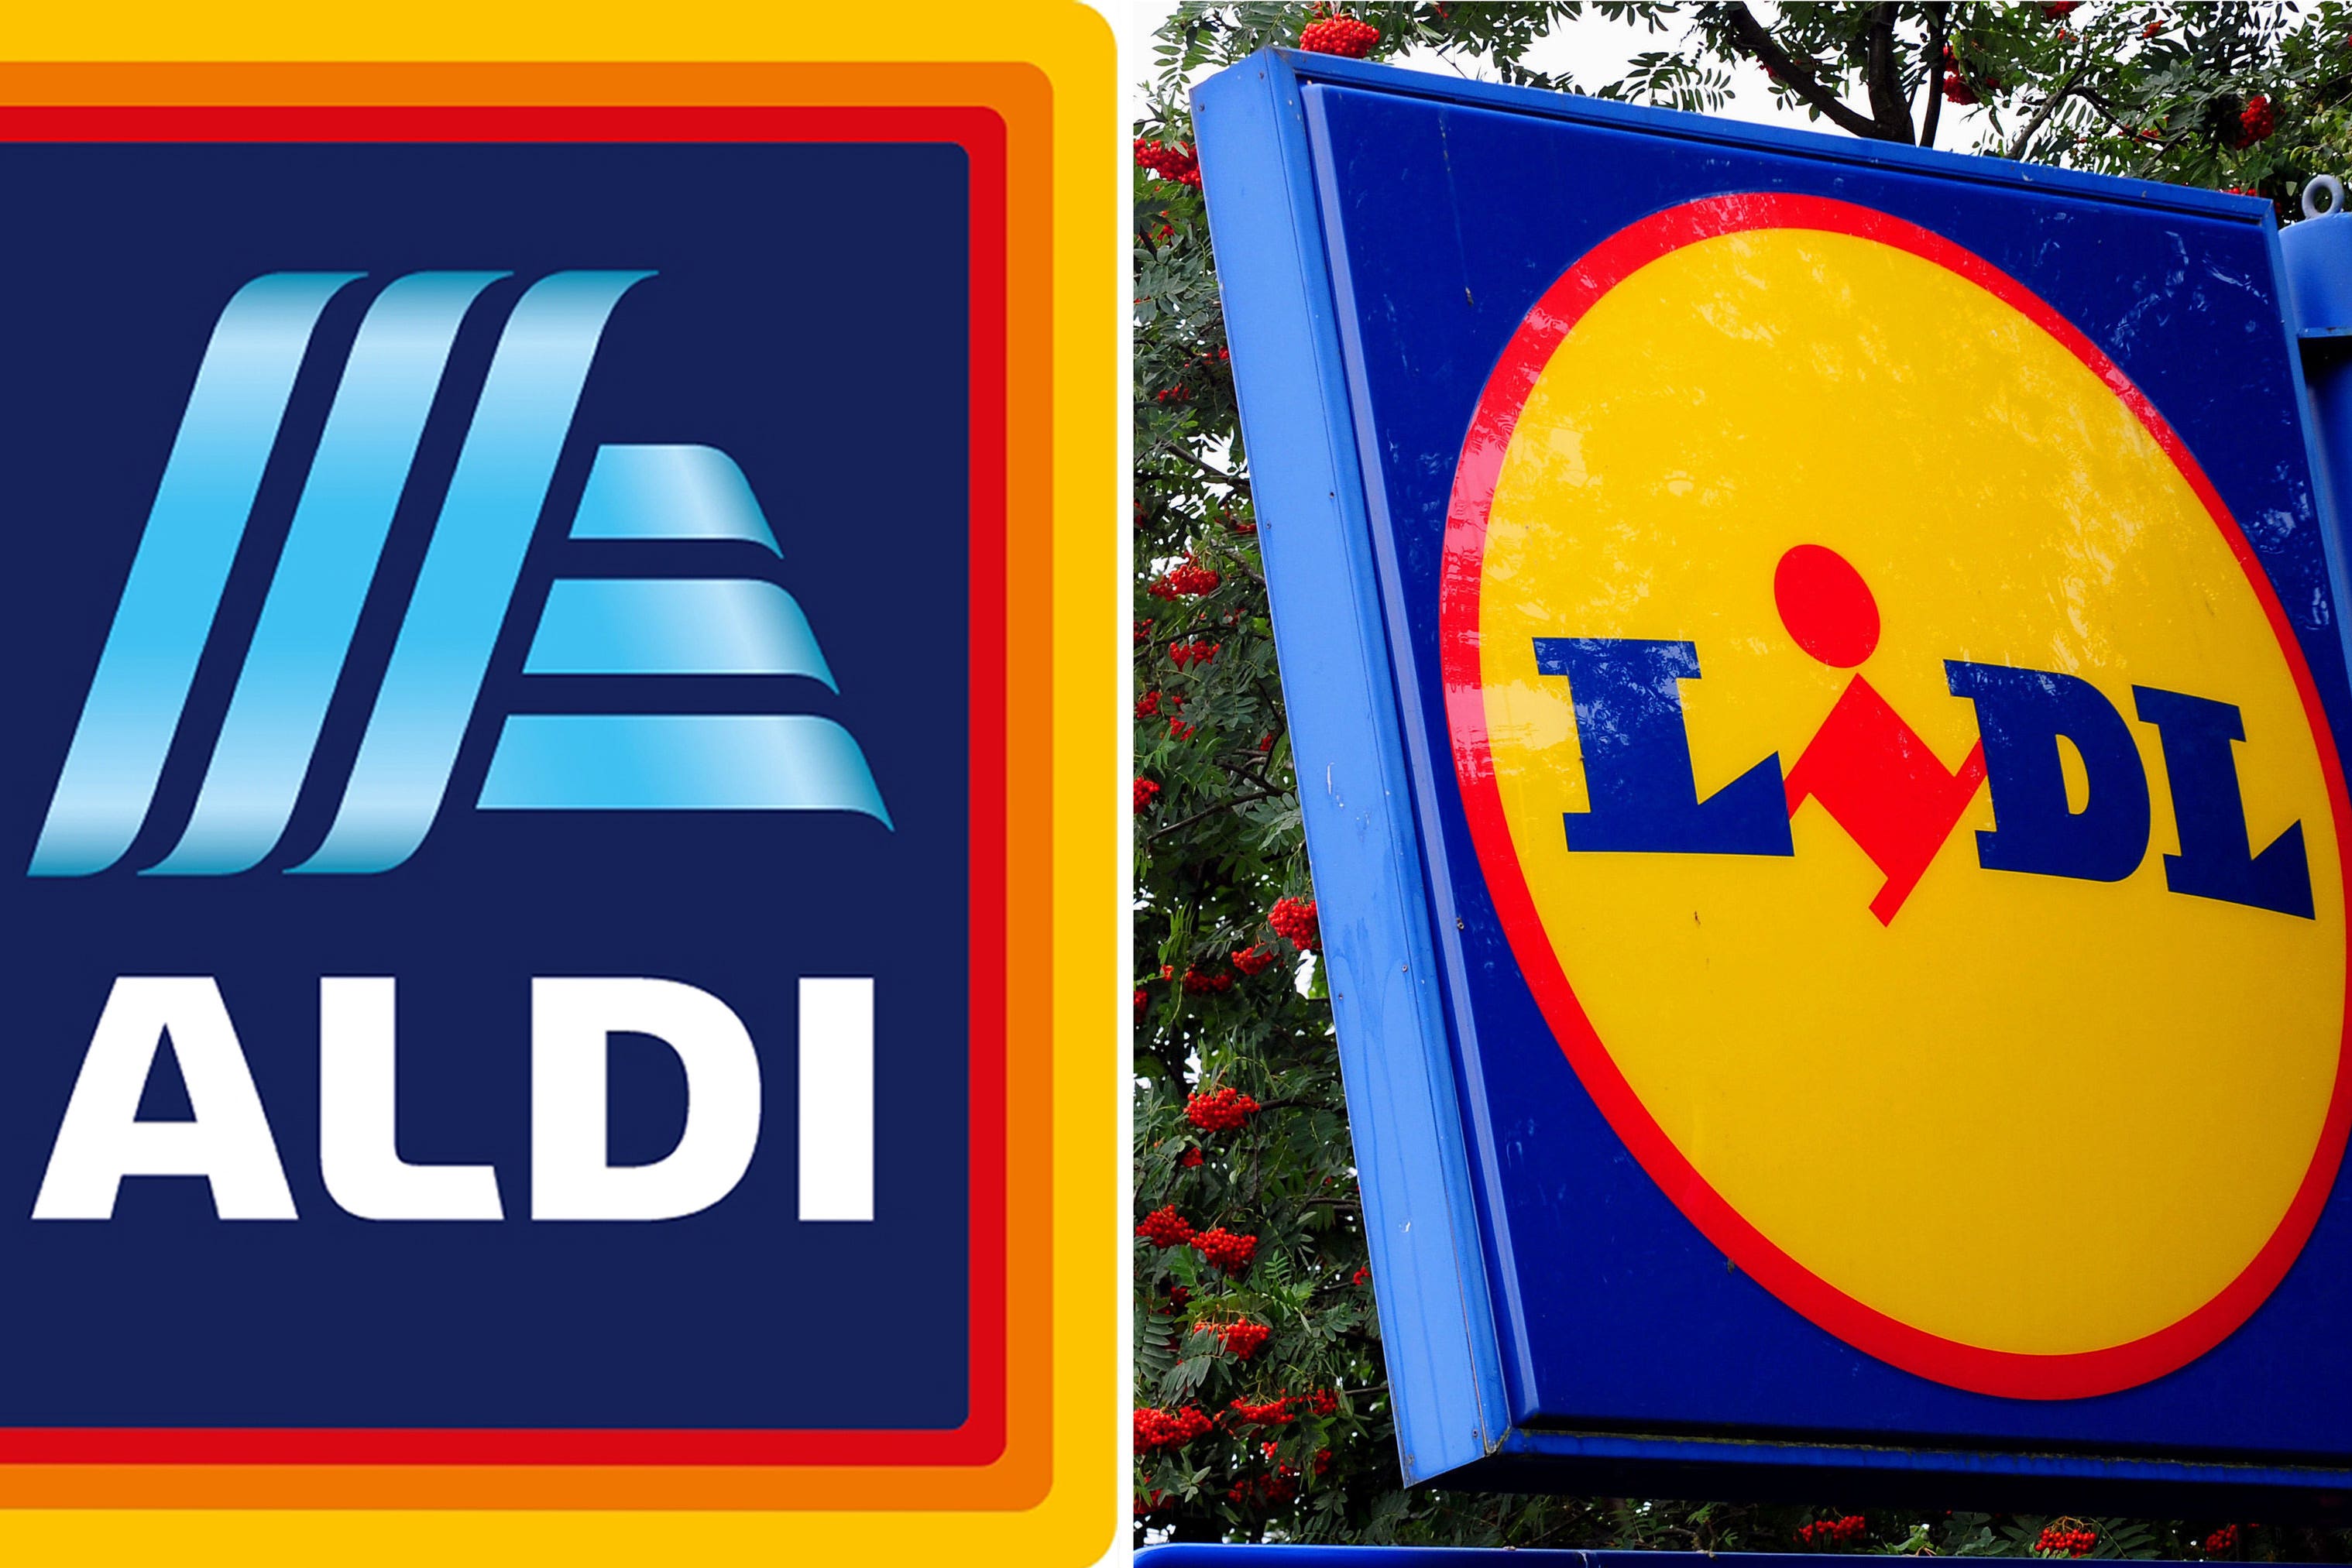 Aldi and Lidl are in a price war